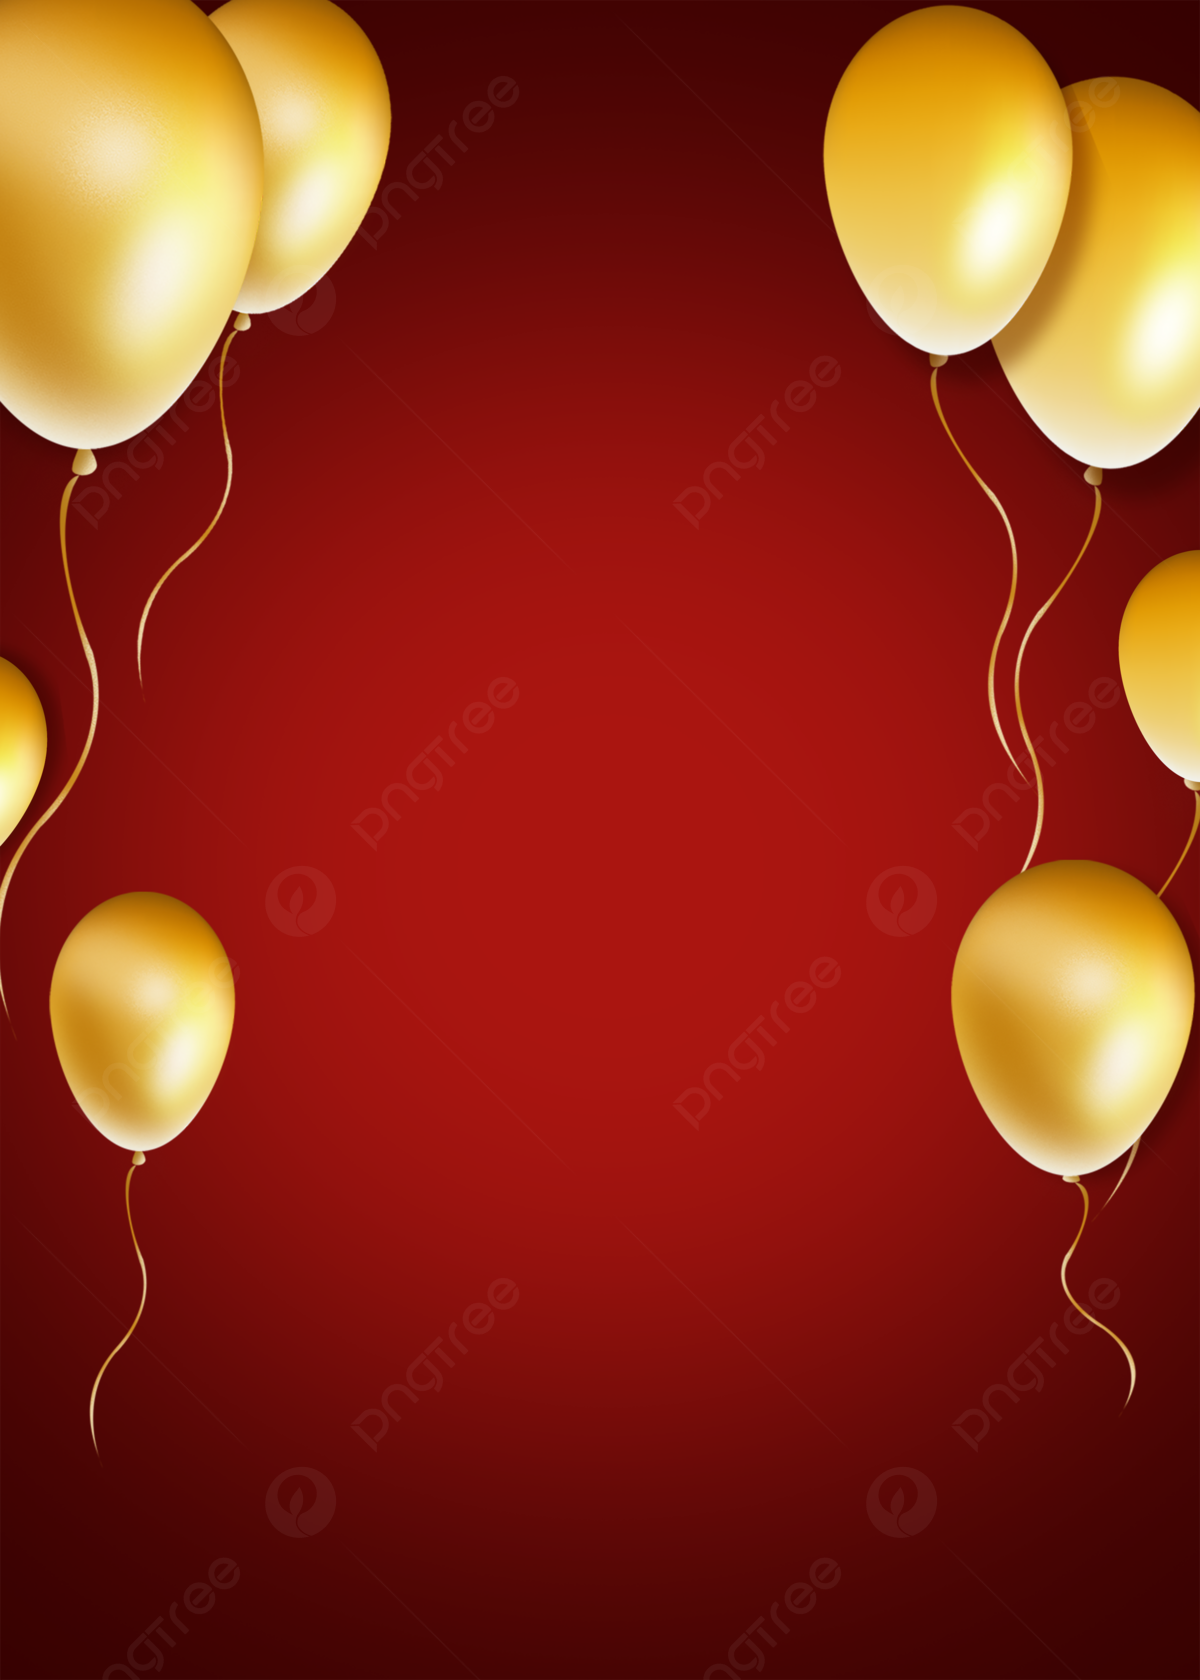 Red Balloon Wallpapers